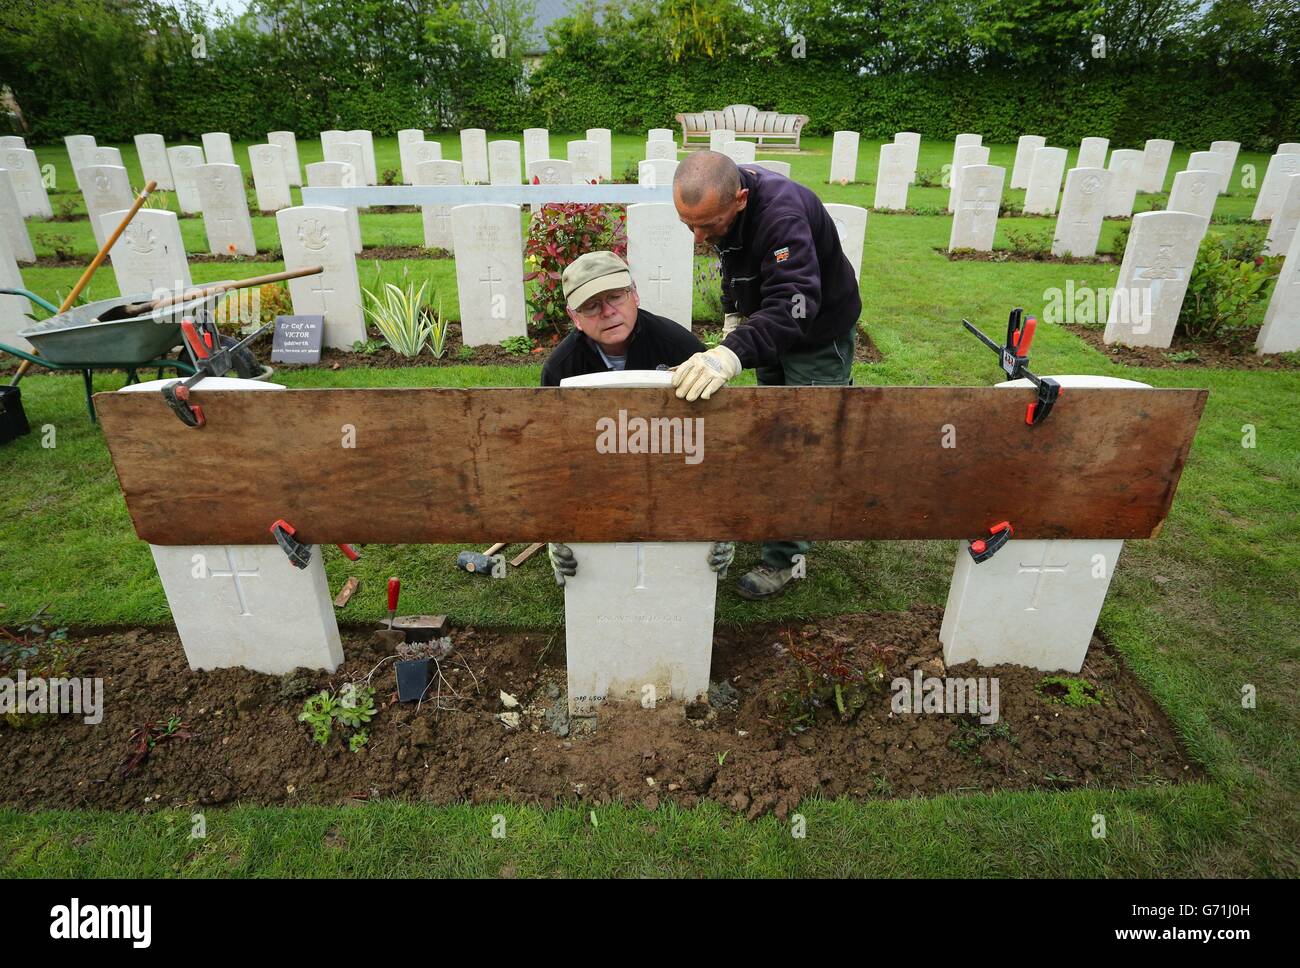 Gardener Caretaker First Class Myles Hunt (left) at the Bayeux War Cemetery in Normandy, with his assistant Jean-Claude Menoux, align the last of just over 4,000 headstones which have been replaced at Bayeux, as the Commonwealth War Graves Commission (CWGC) is working to replace thousands of fallen and damaged headstones at its cemeteries across France and beyond, as it marks both the 70th anniversary of the Normandy landings, and the centenary of the First World War. Stock Photo